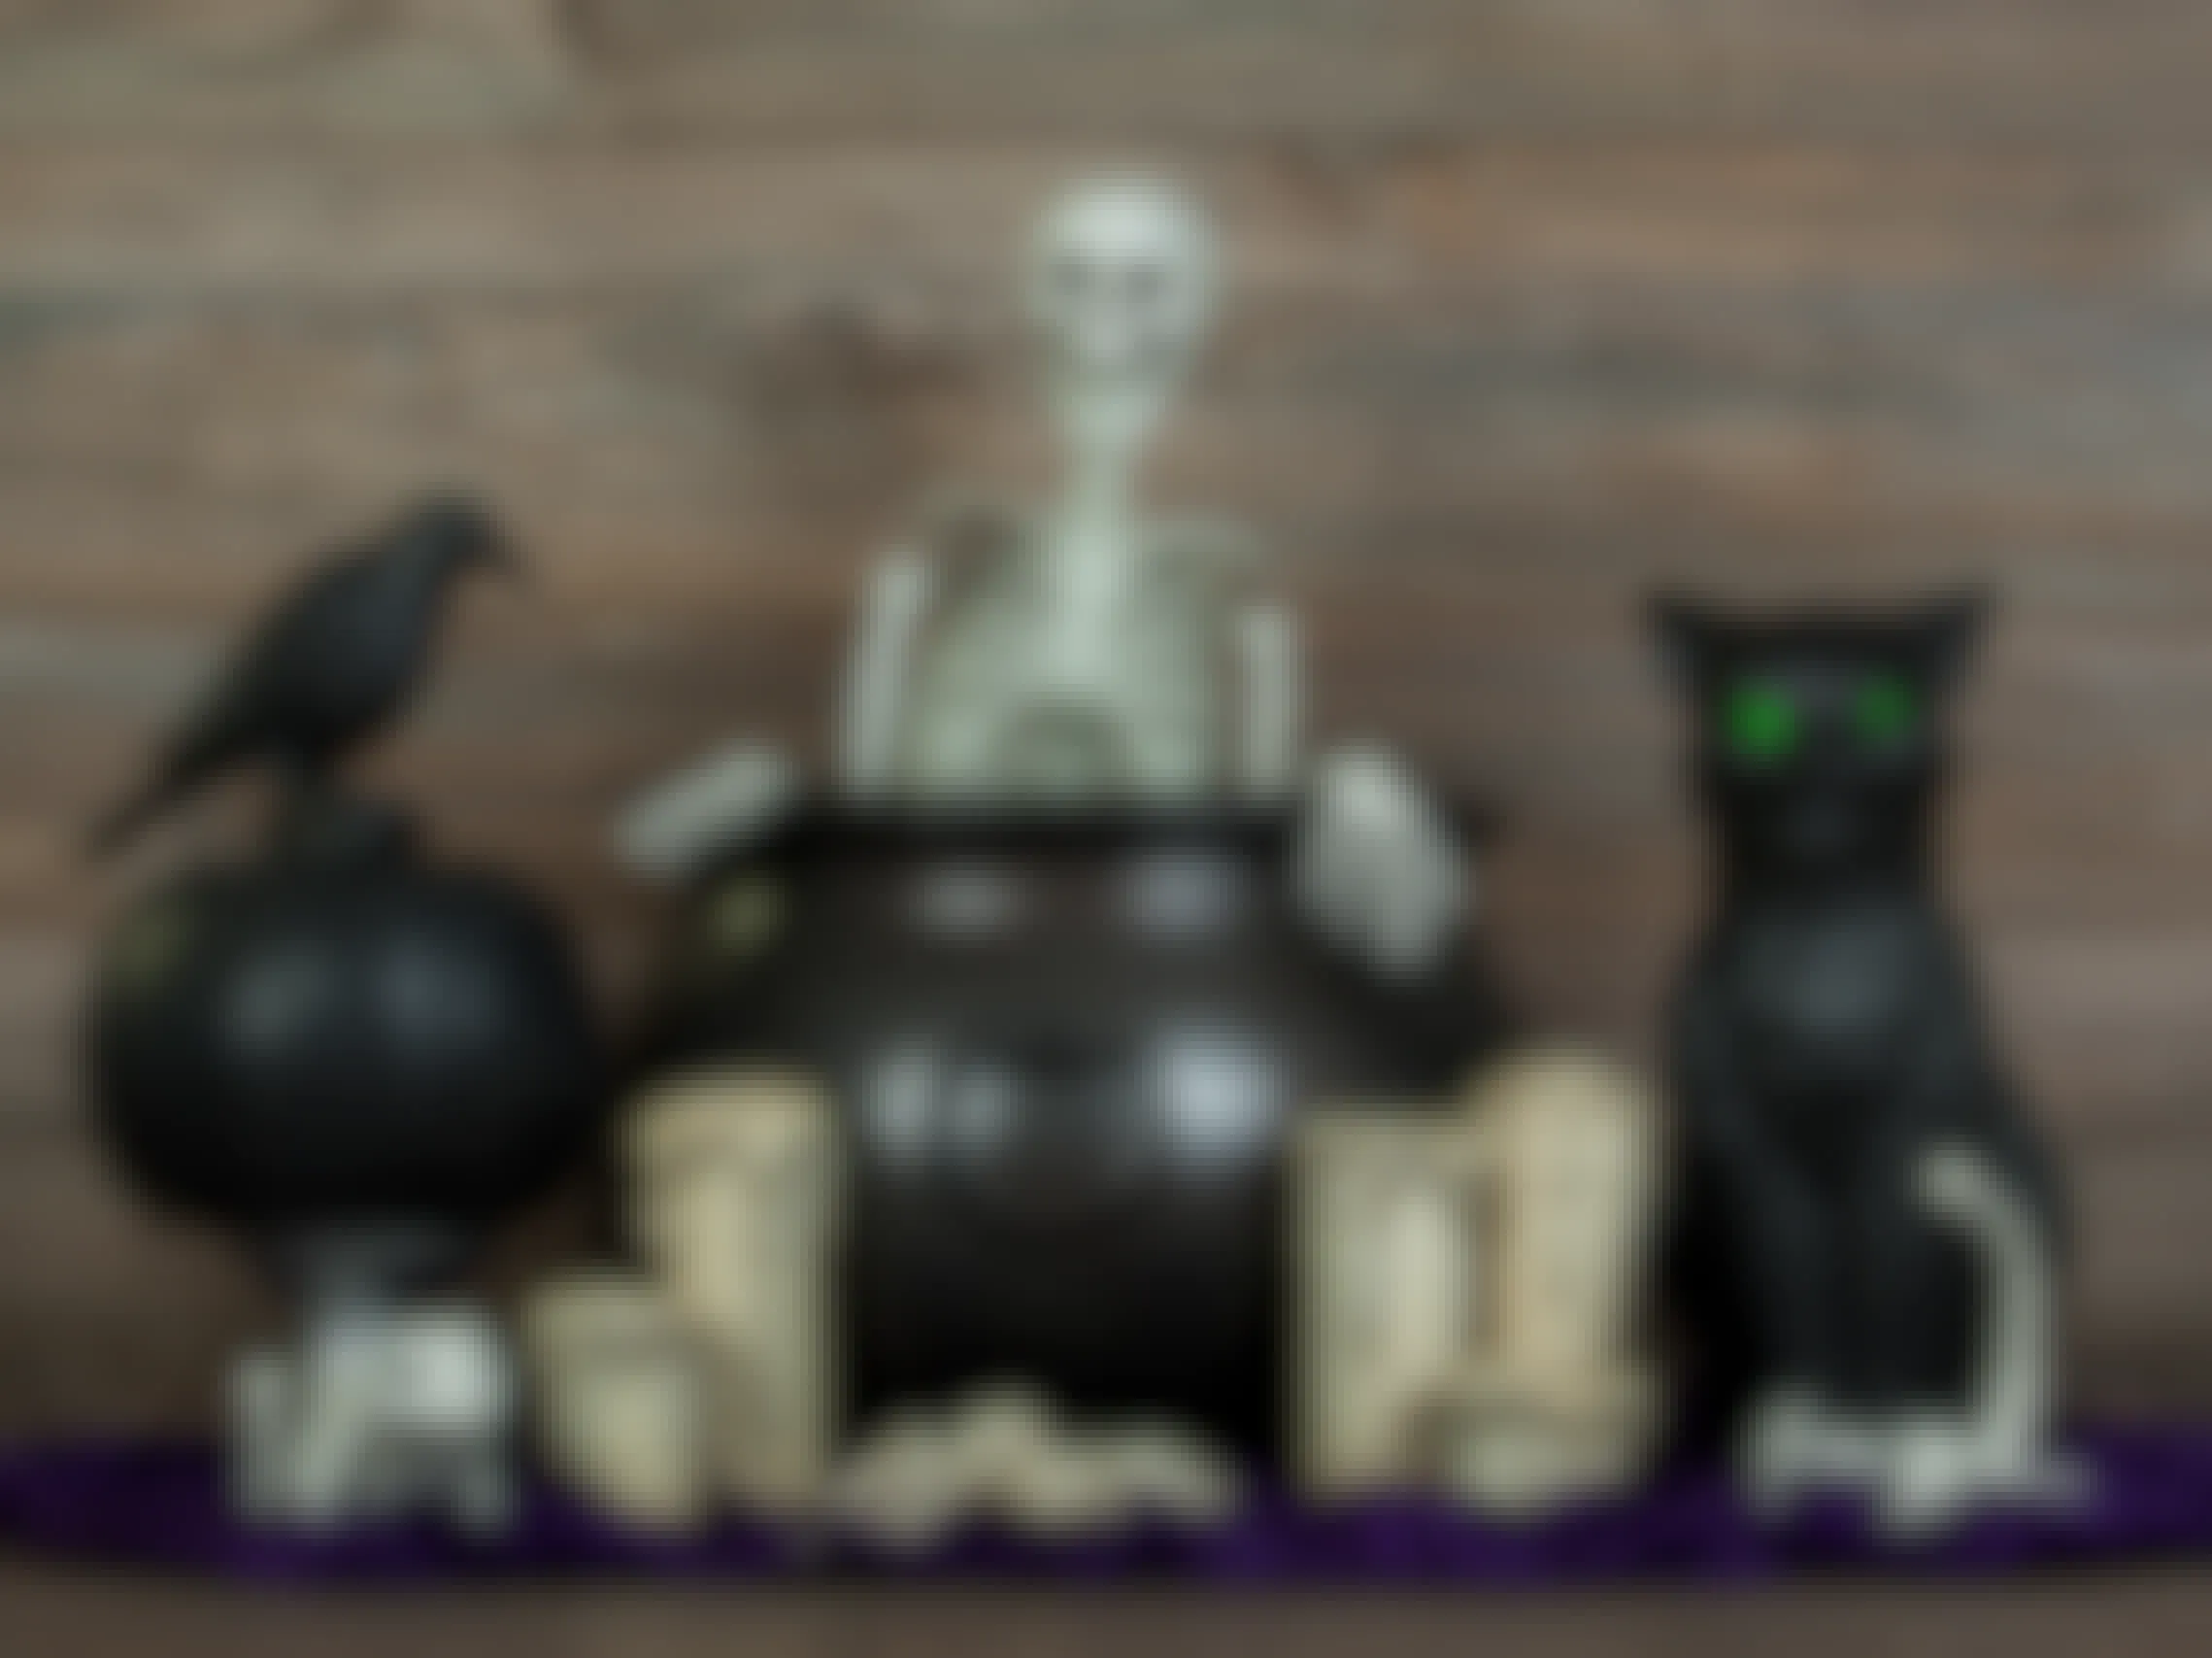 Halloween decorations grouped together on a table including a cauldron, a skeleton, a crow, a black cat, some candles, and more.